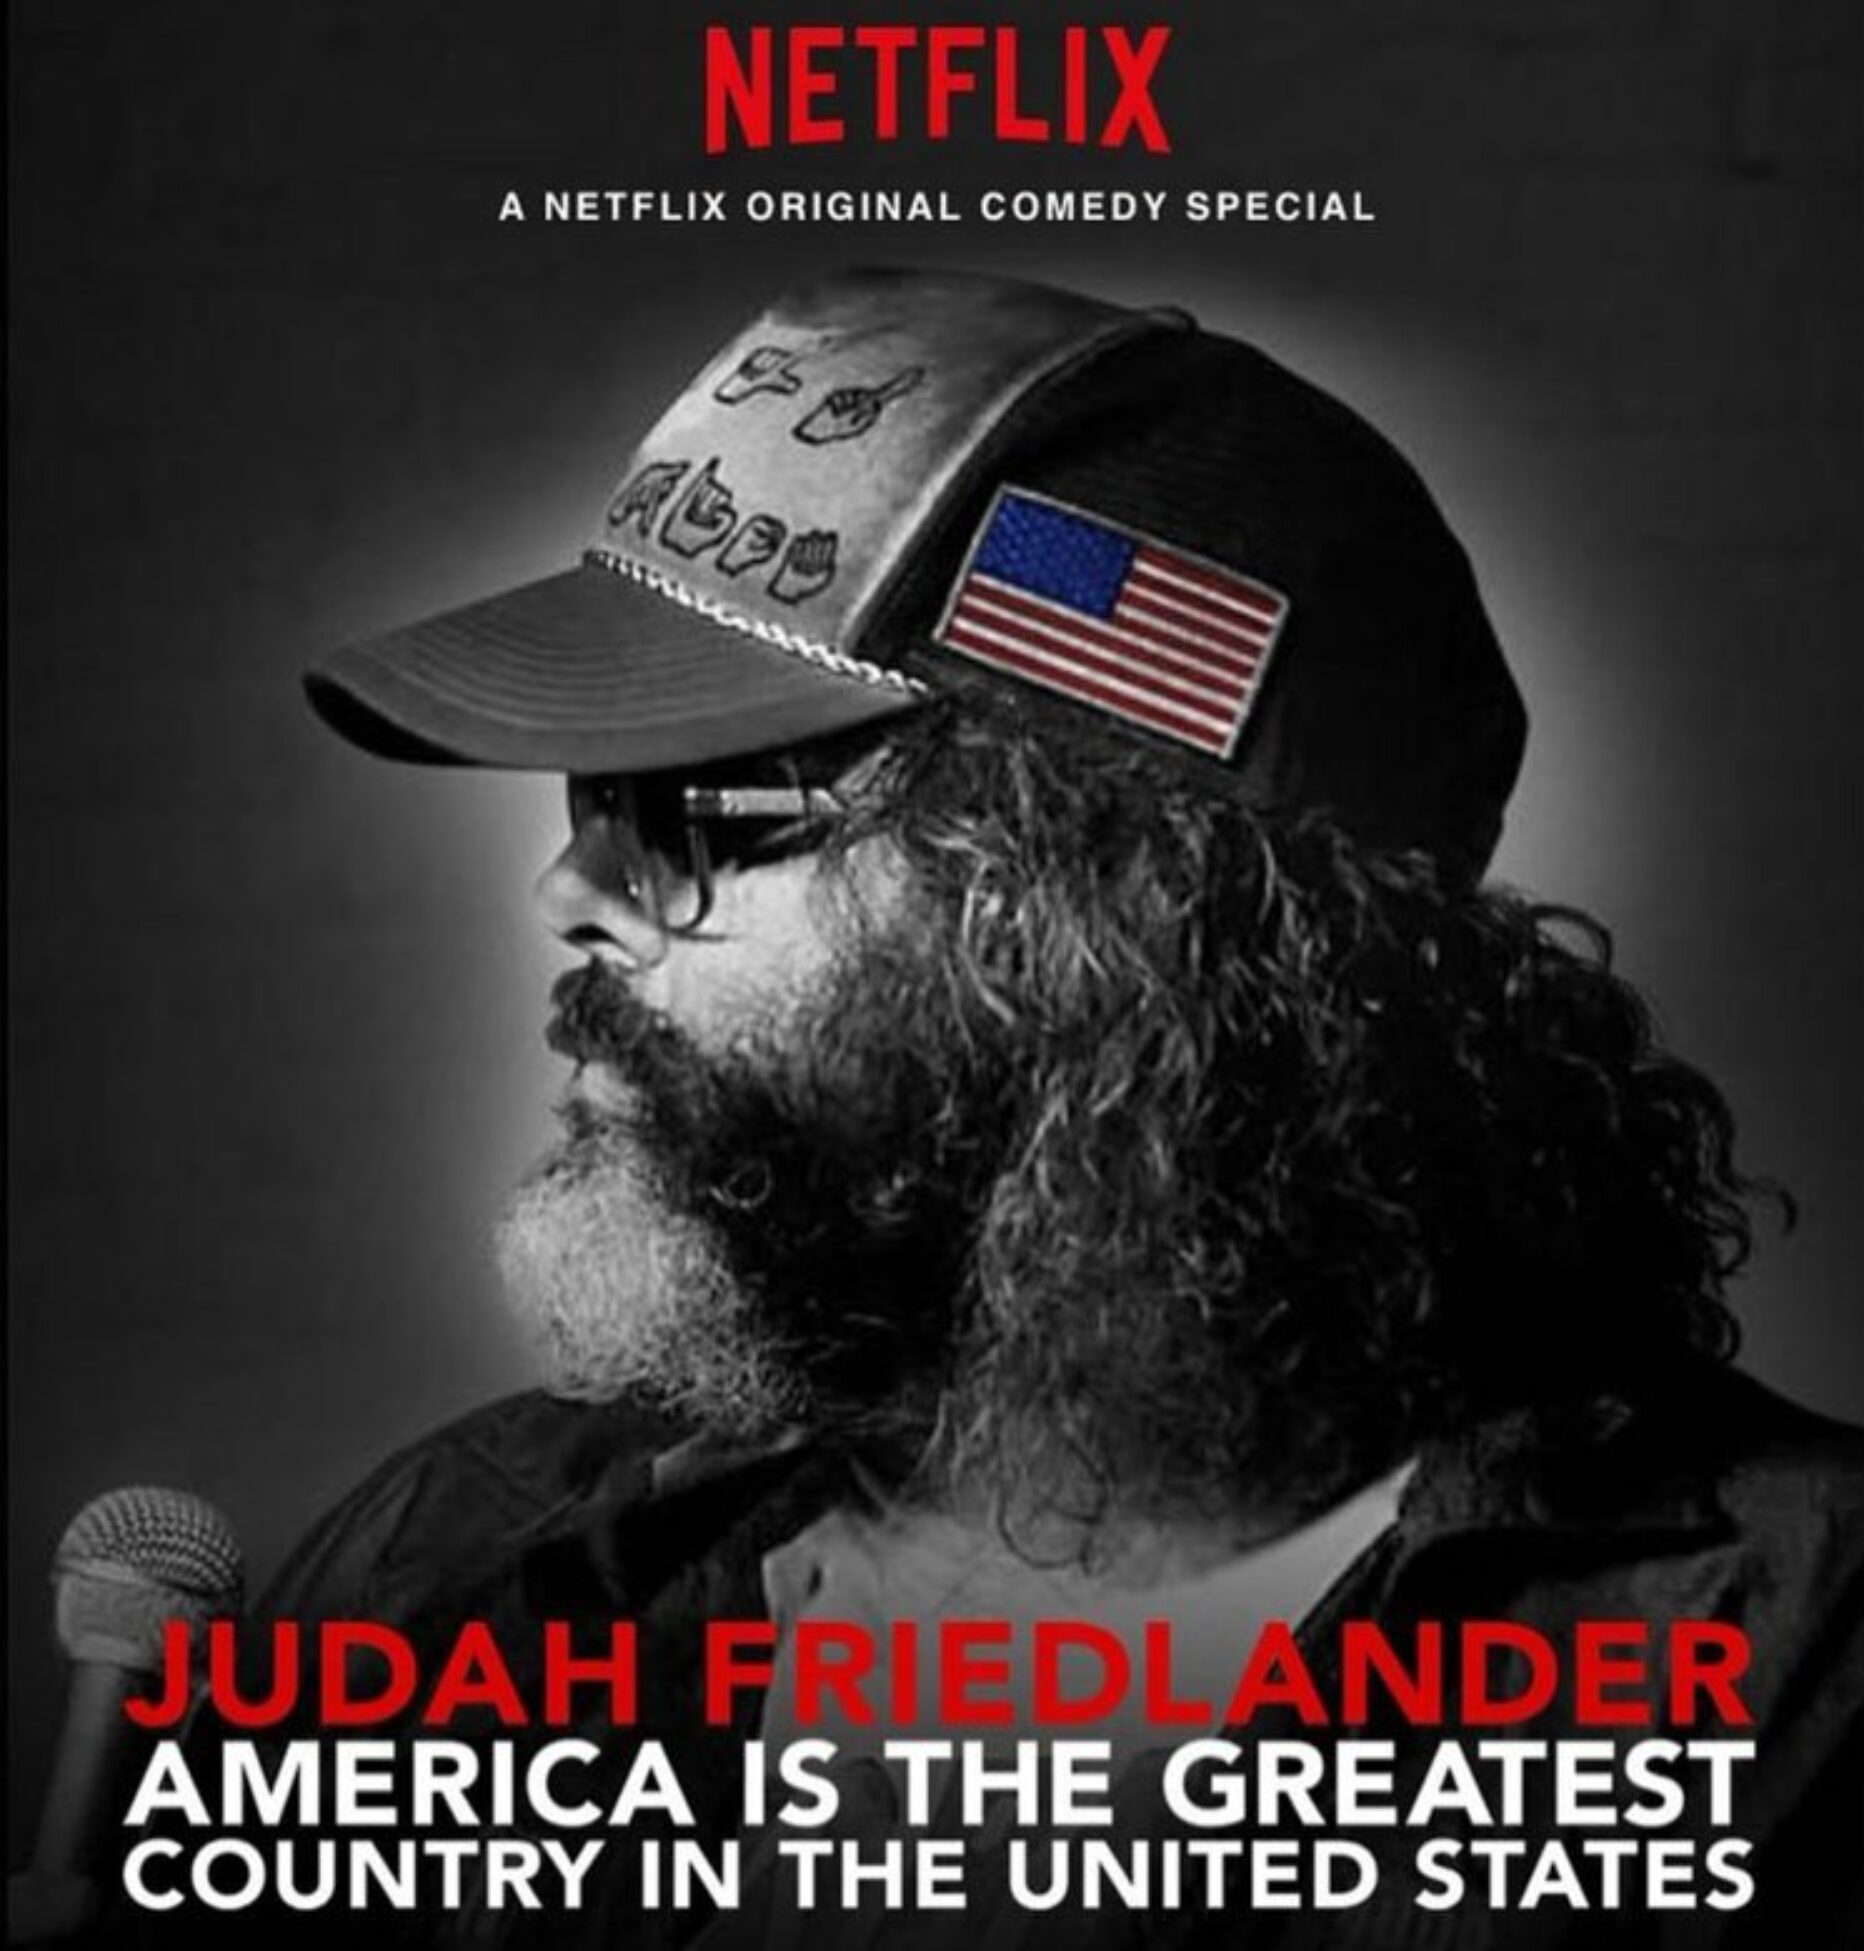 Judah Friedlander – America is the greatest country in United States